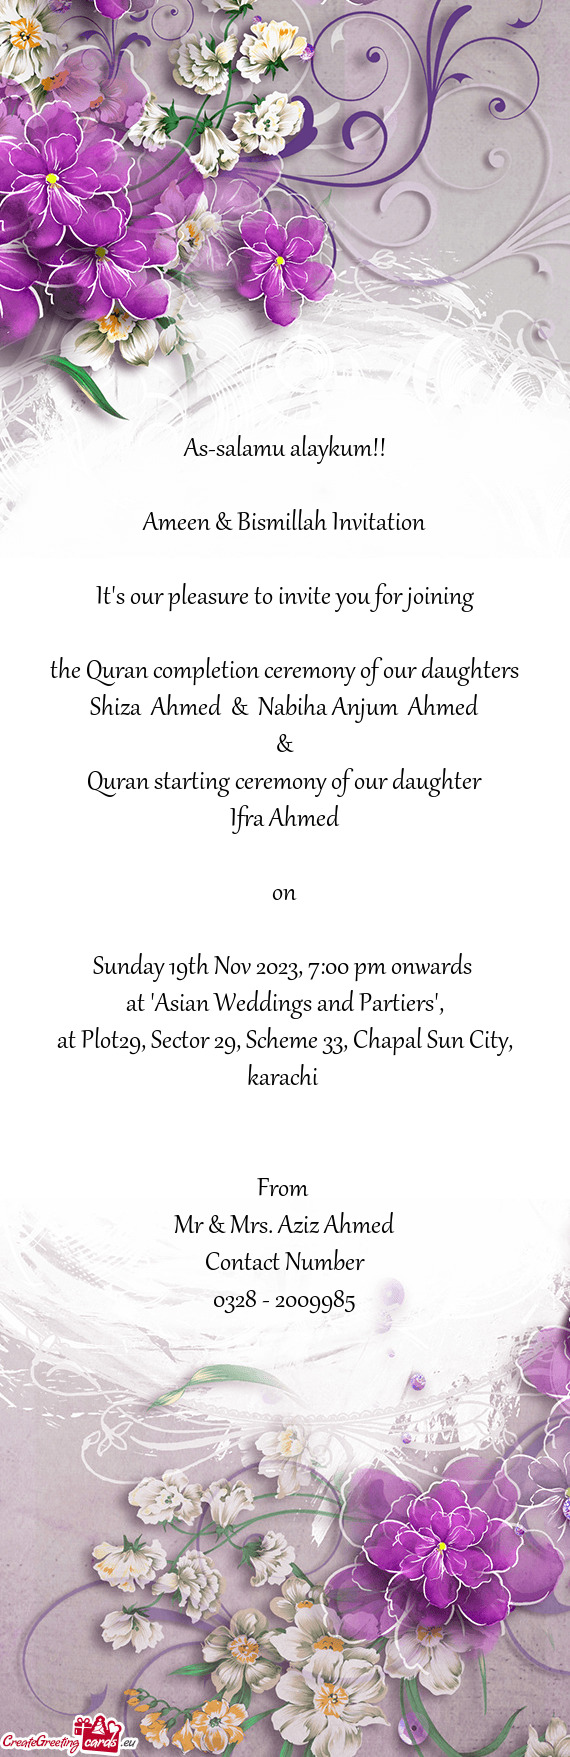 The Quran completion ceremony of our daughters